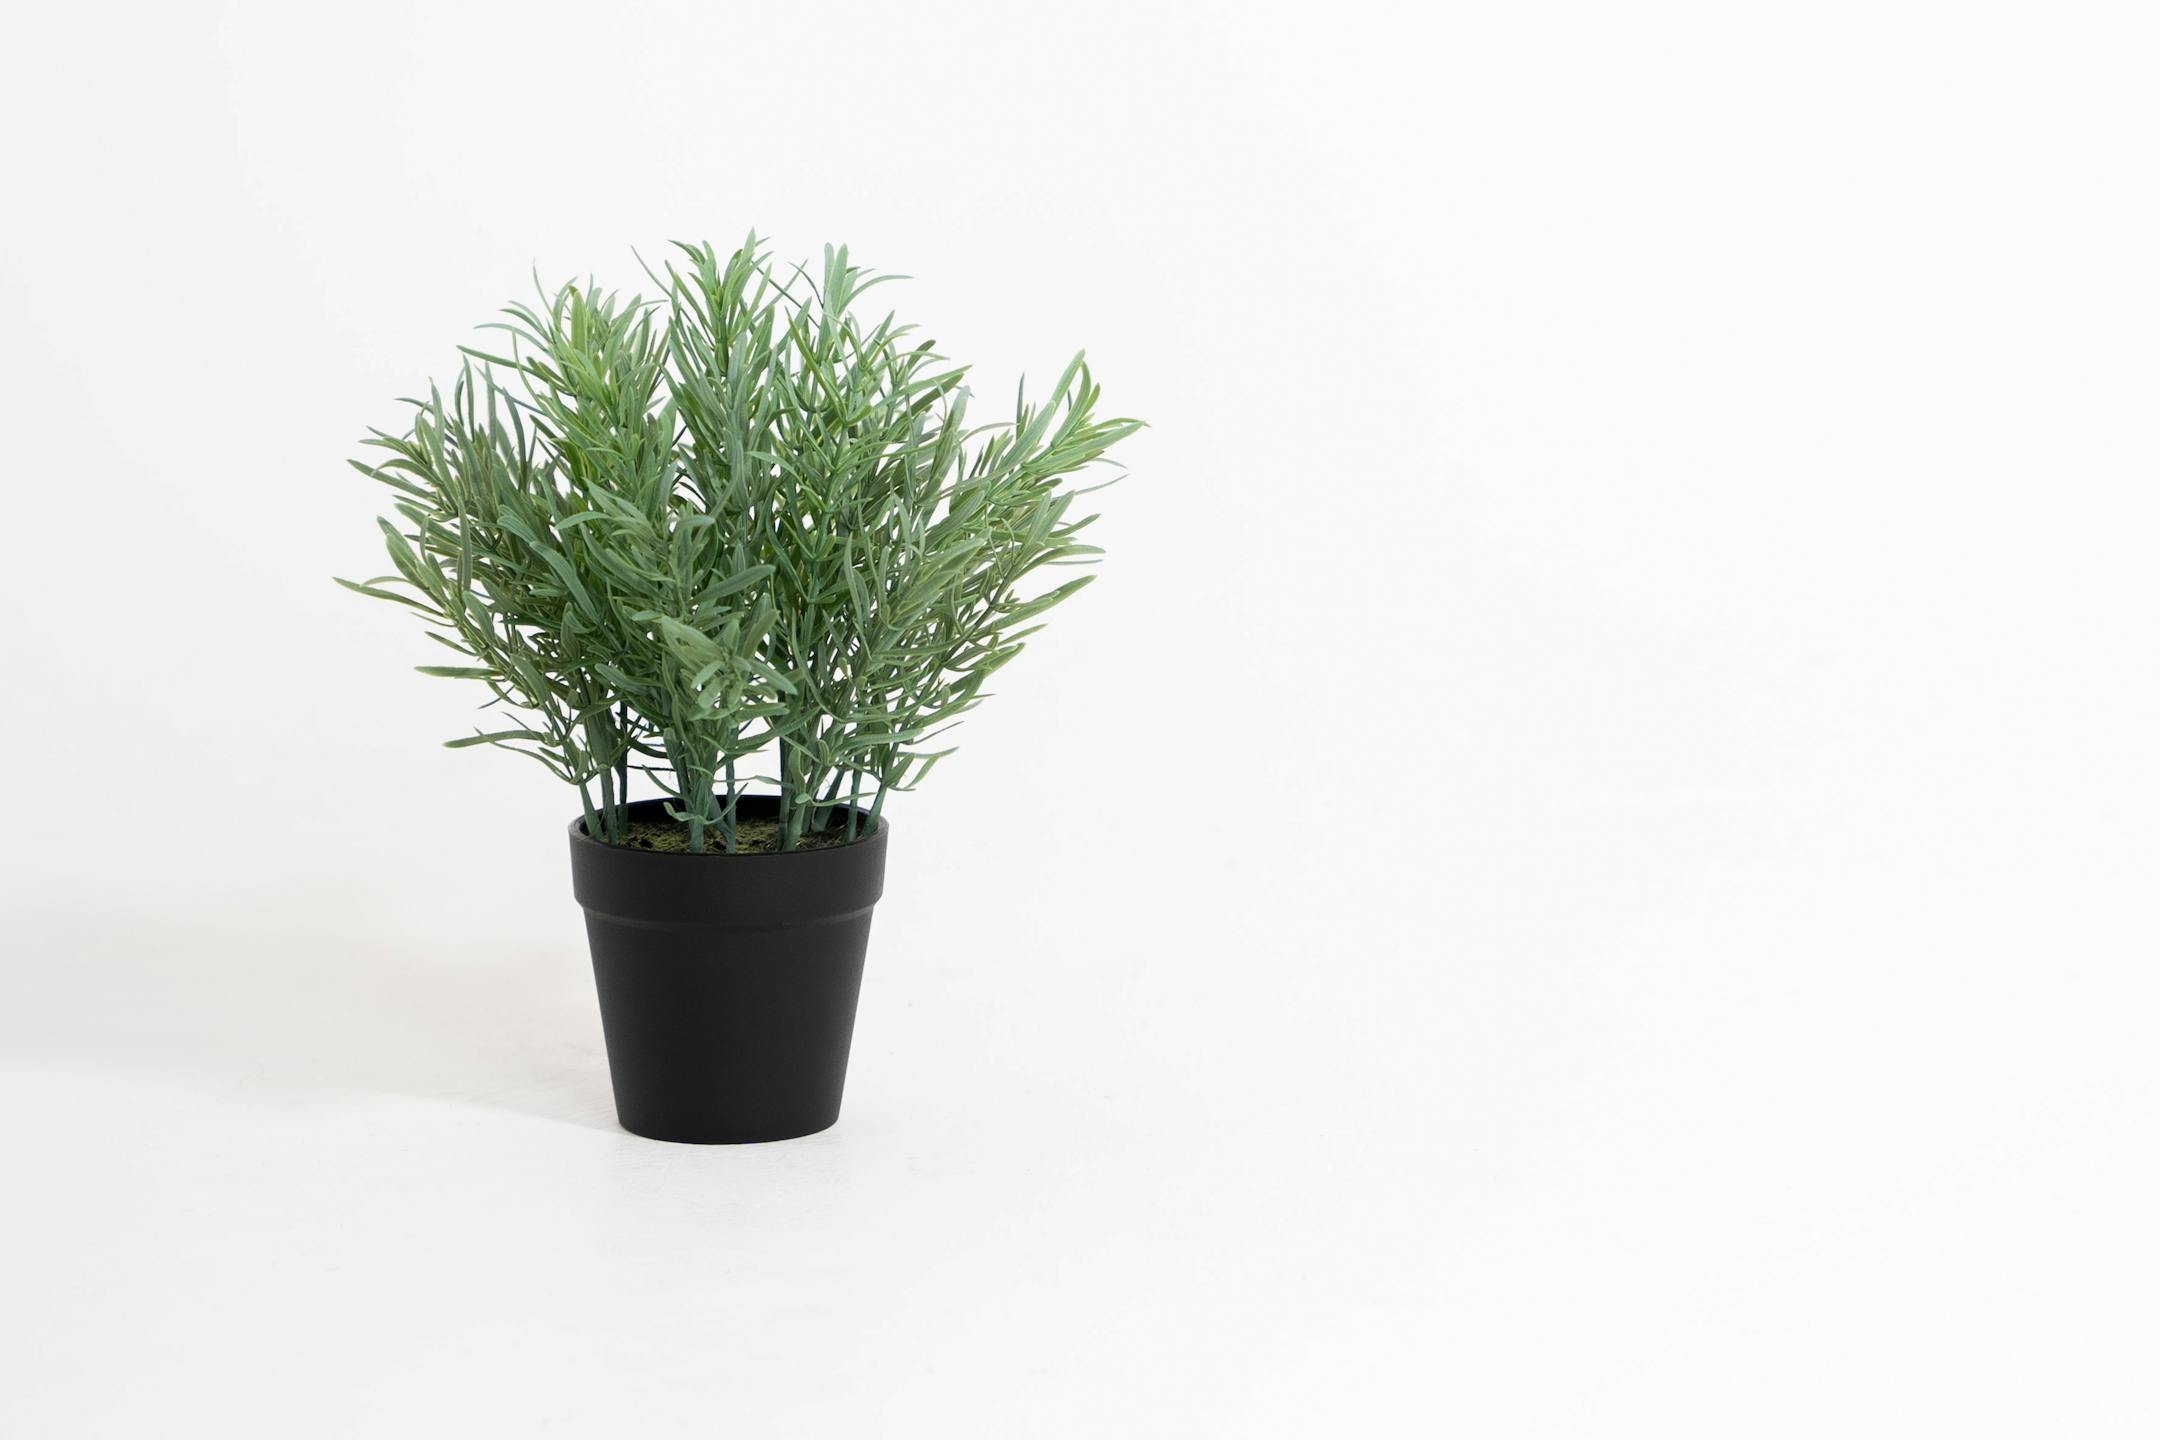 Artificial rosemary plant